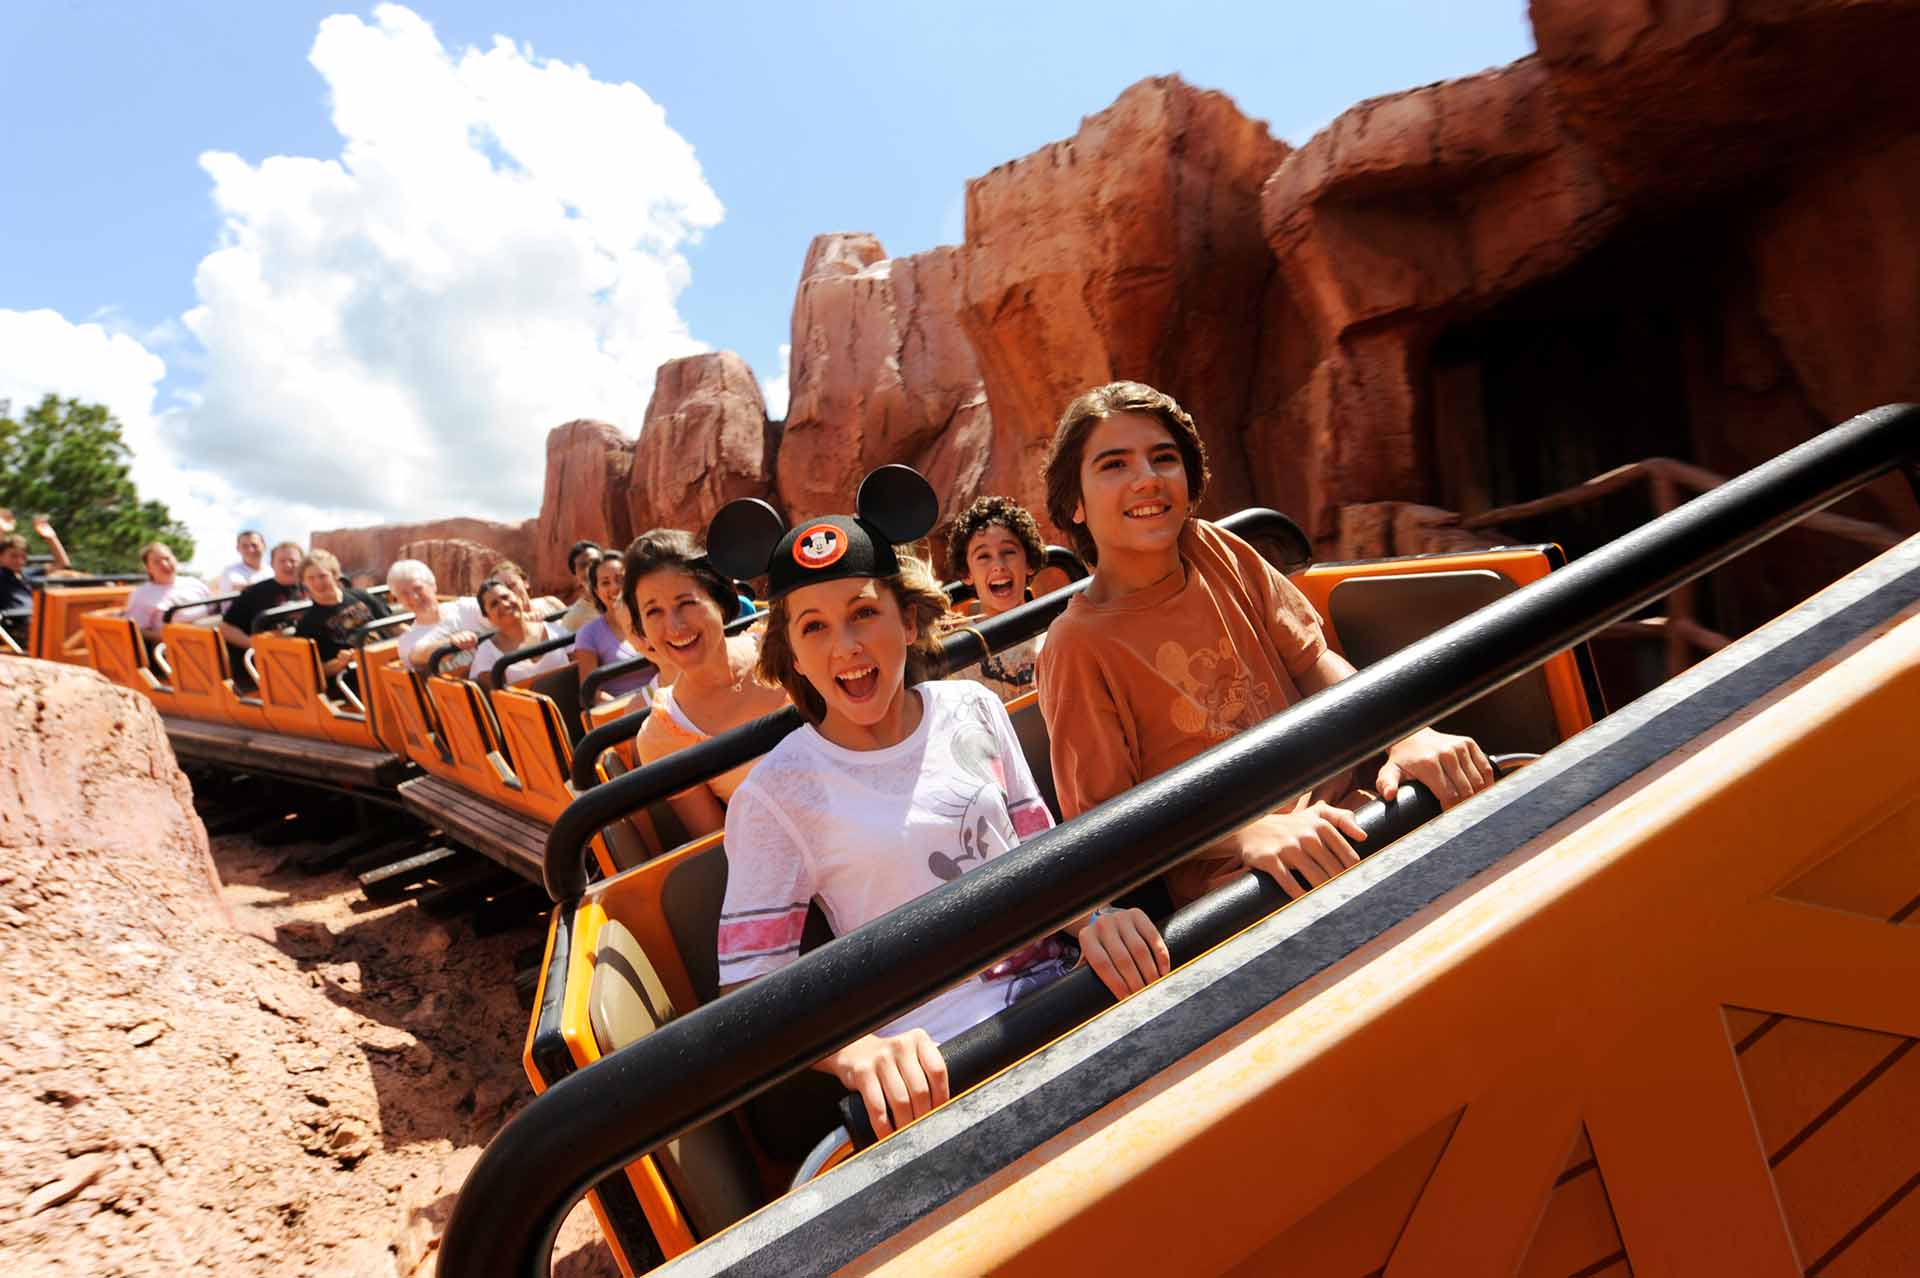 Group of people riding on the Big Thunder Mountain Railroad roller coaster at the Magic Kingdom